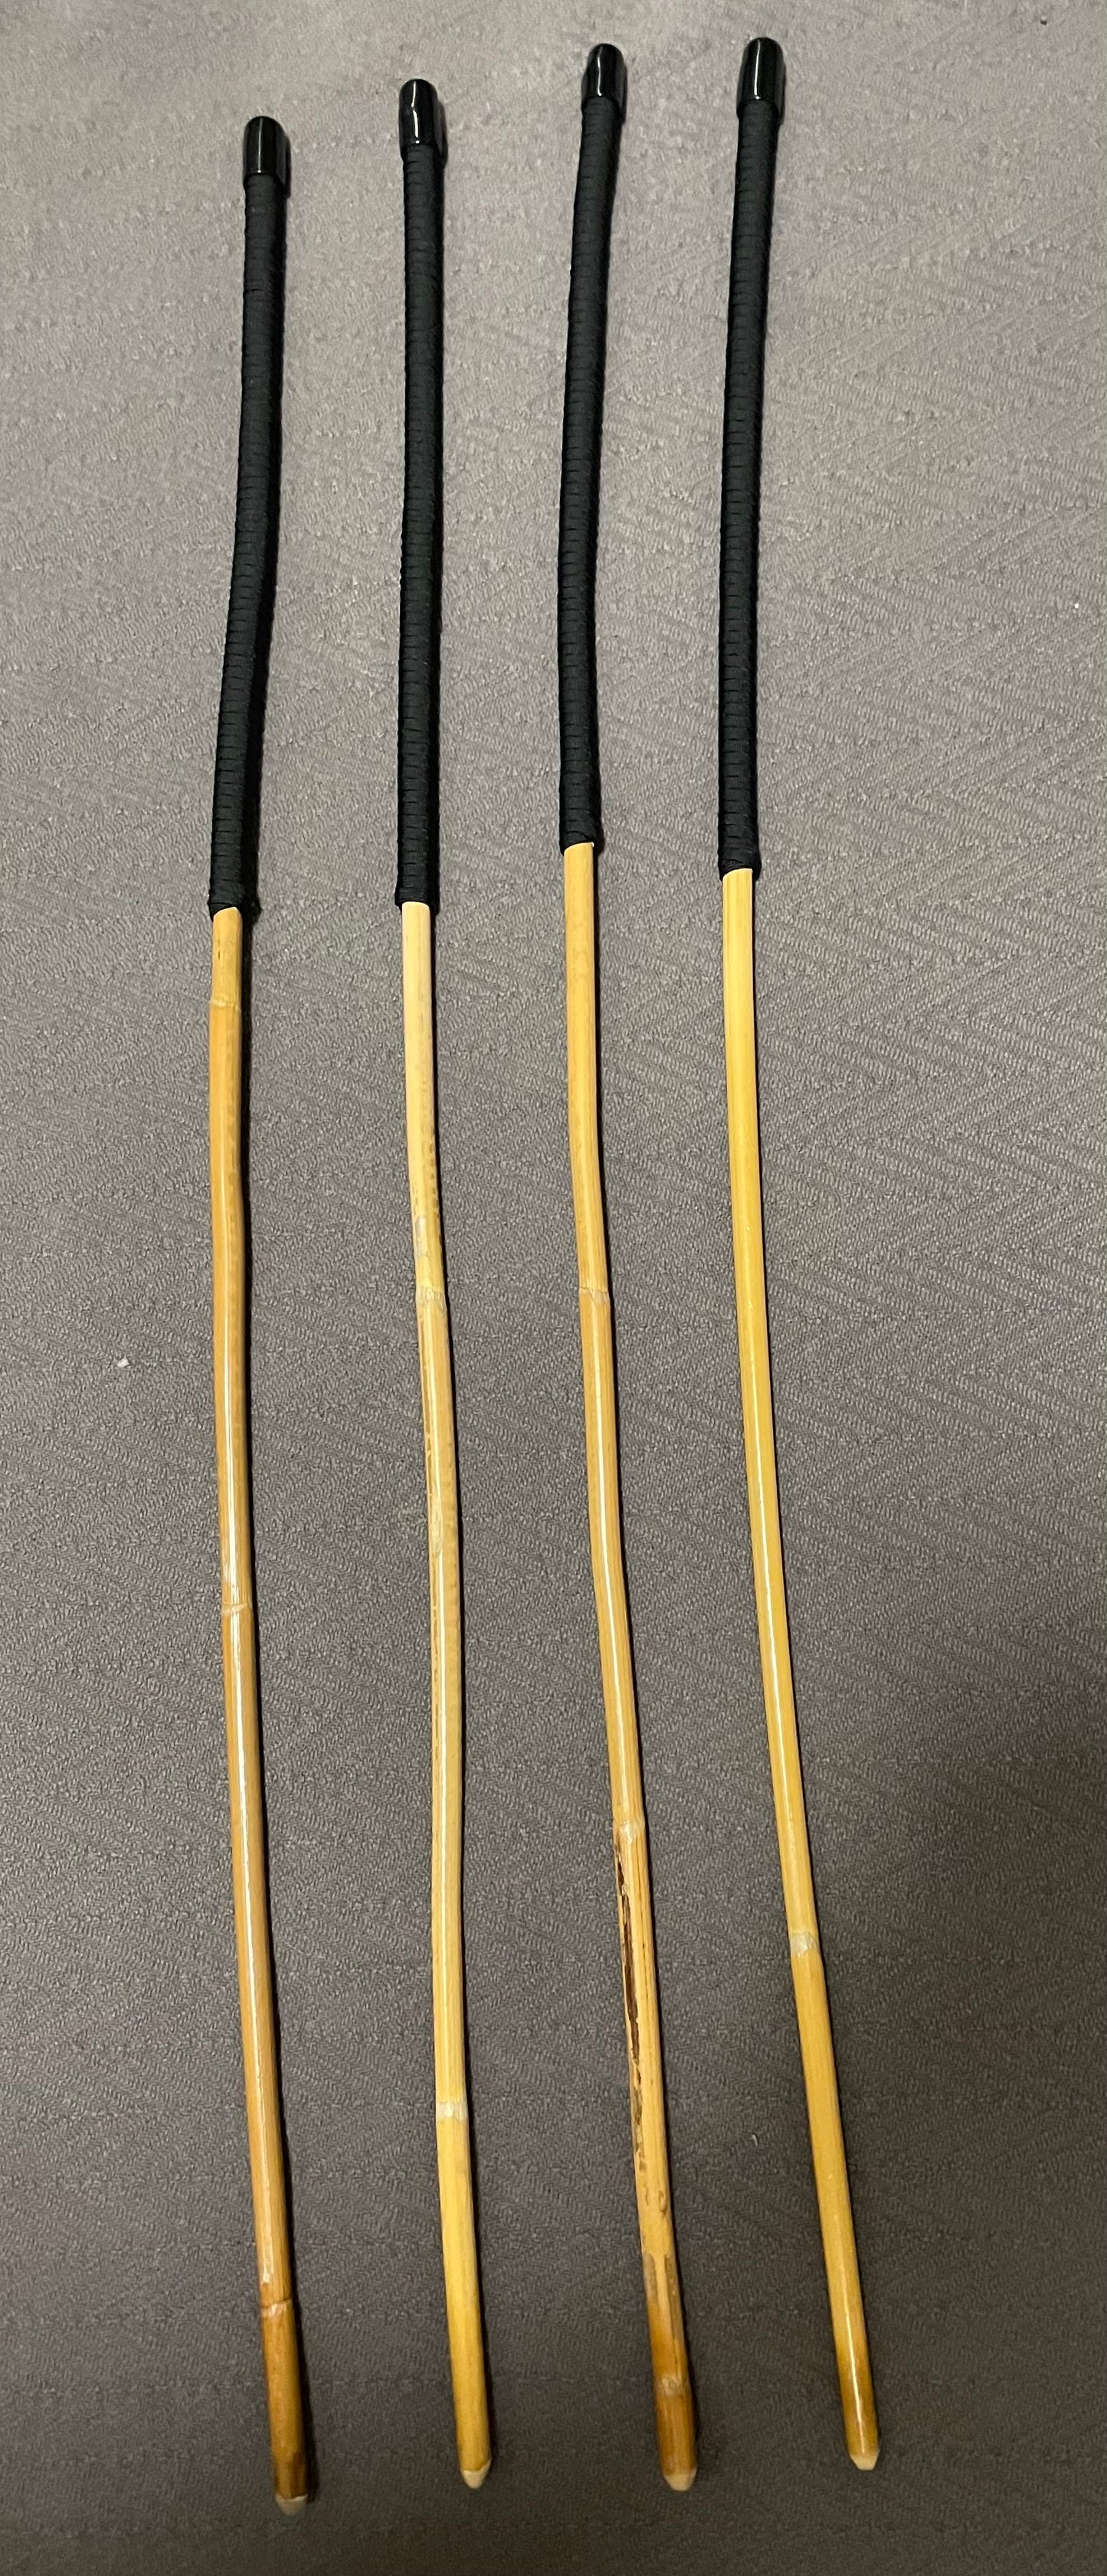 Set of 4 Reformatory Senior Kooboo Rattan Punishment canes  with Black Paracord Handles - 83 to 85 cms L & 10 - 10.5 mm D - Englishvice Canes